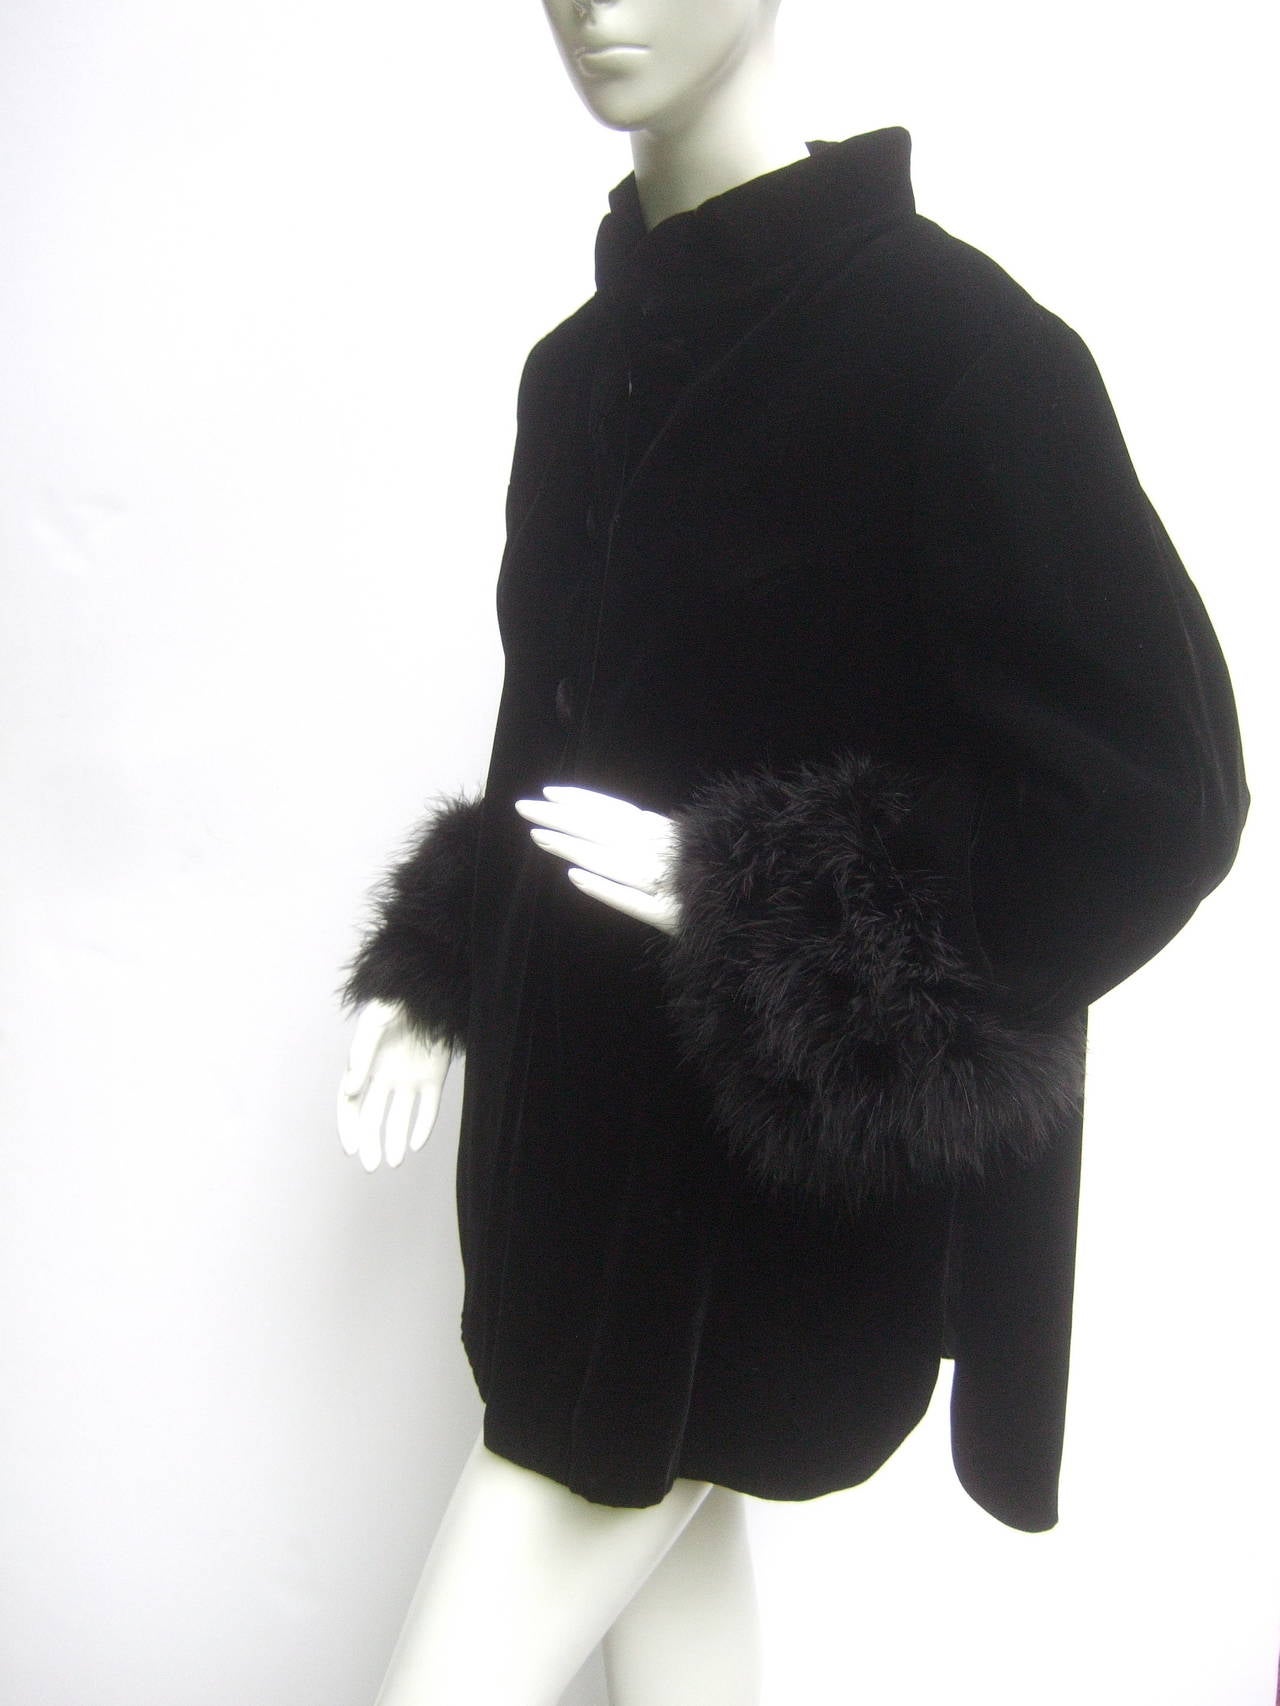 Black Velvet Marabou Cuff Mandrian Collar Jacket c 1970s In Excellent Condition For Sale In University City, MO